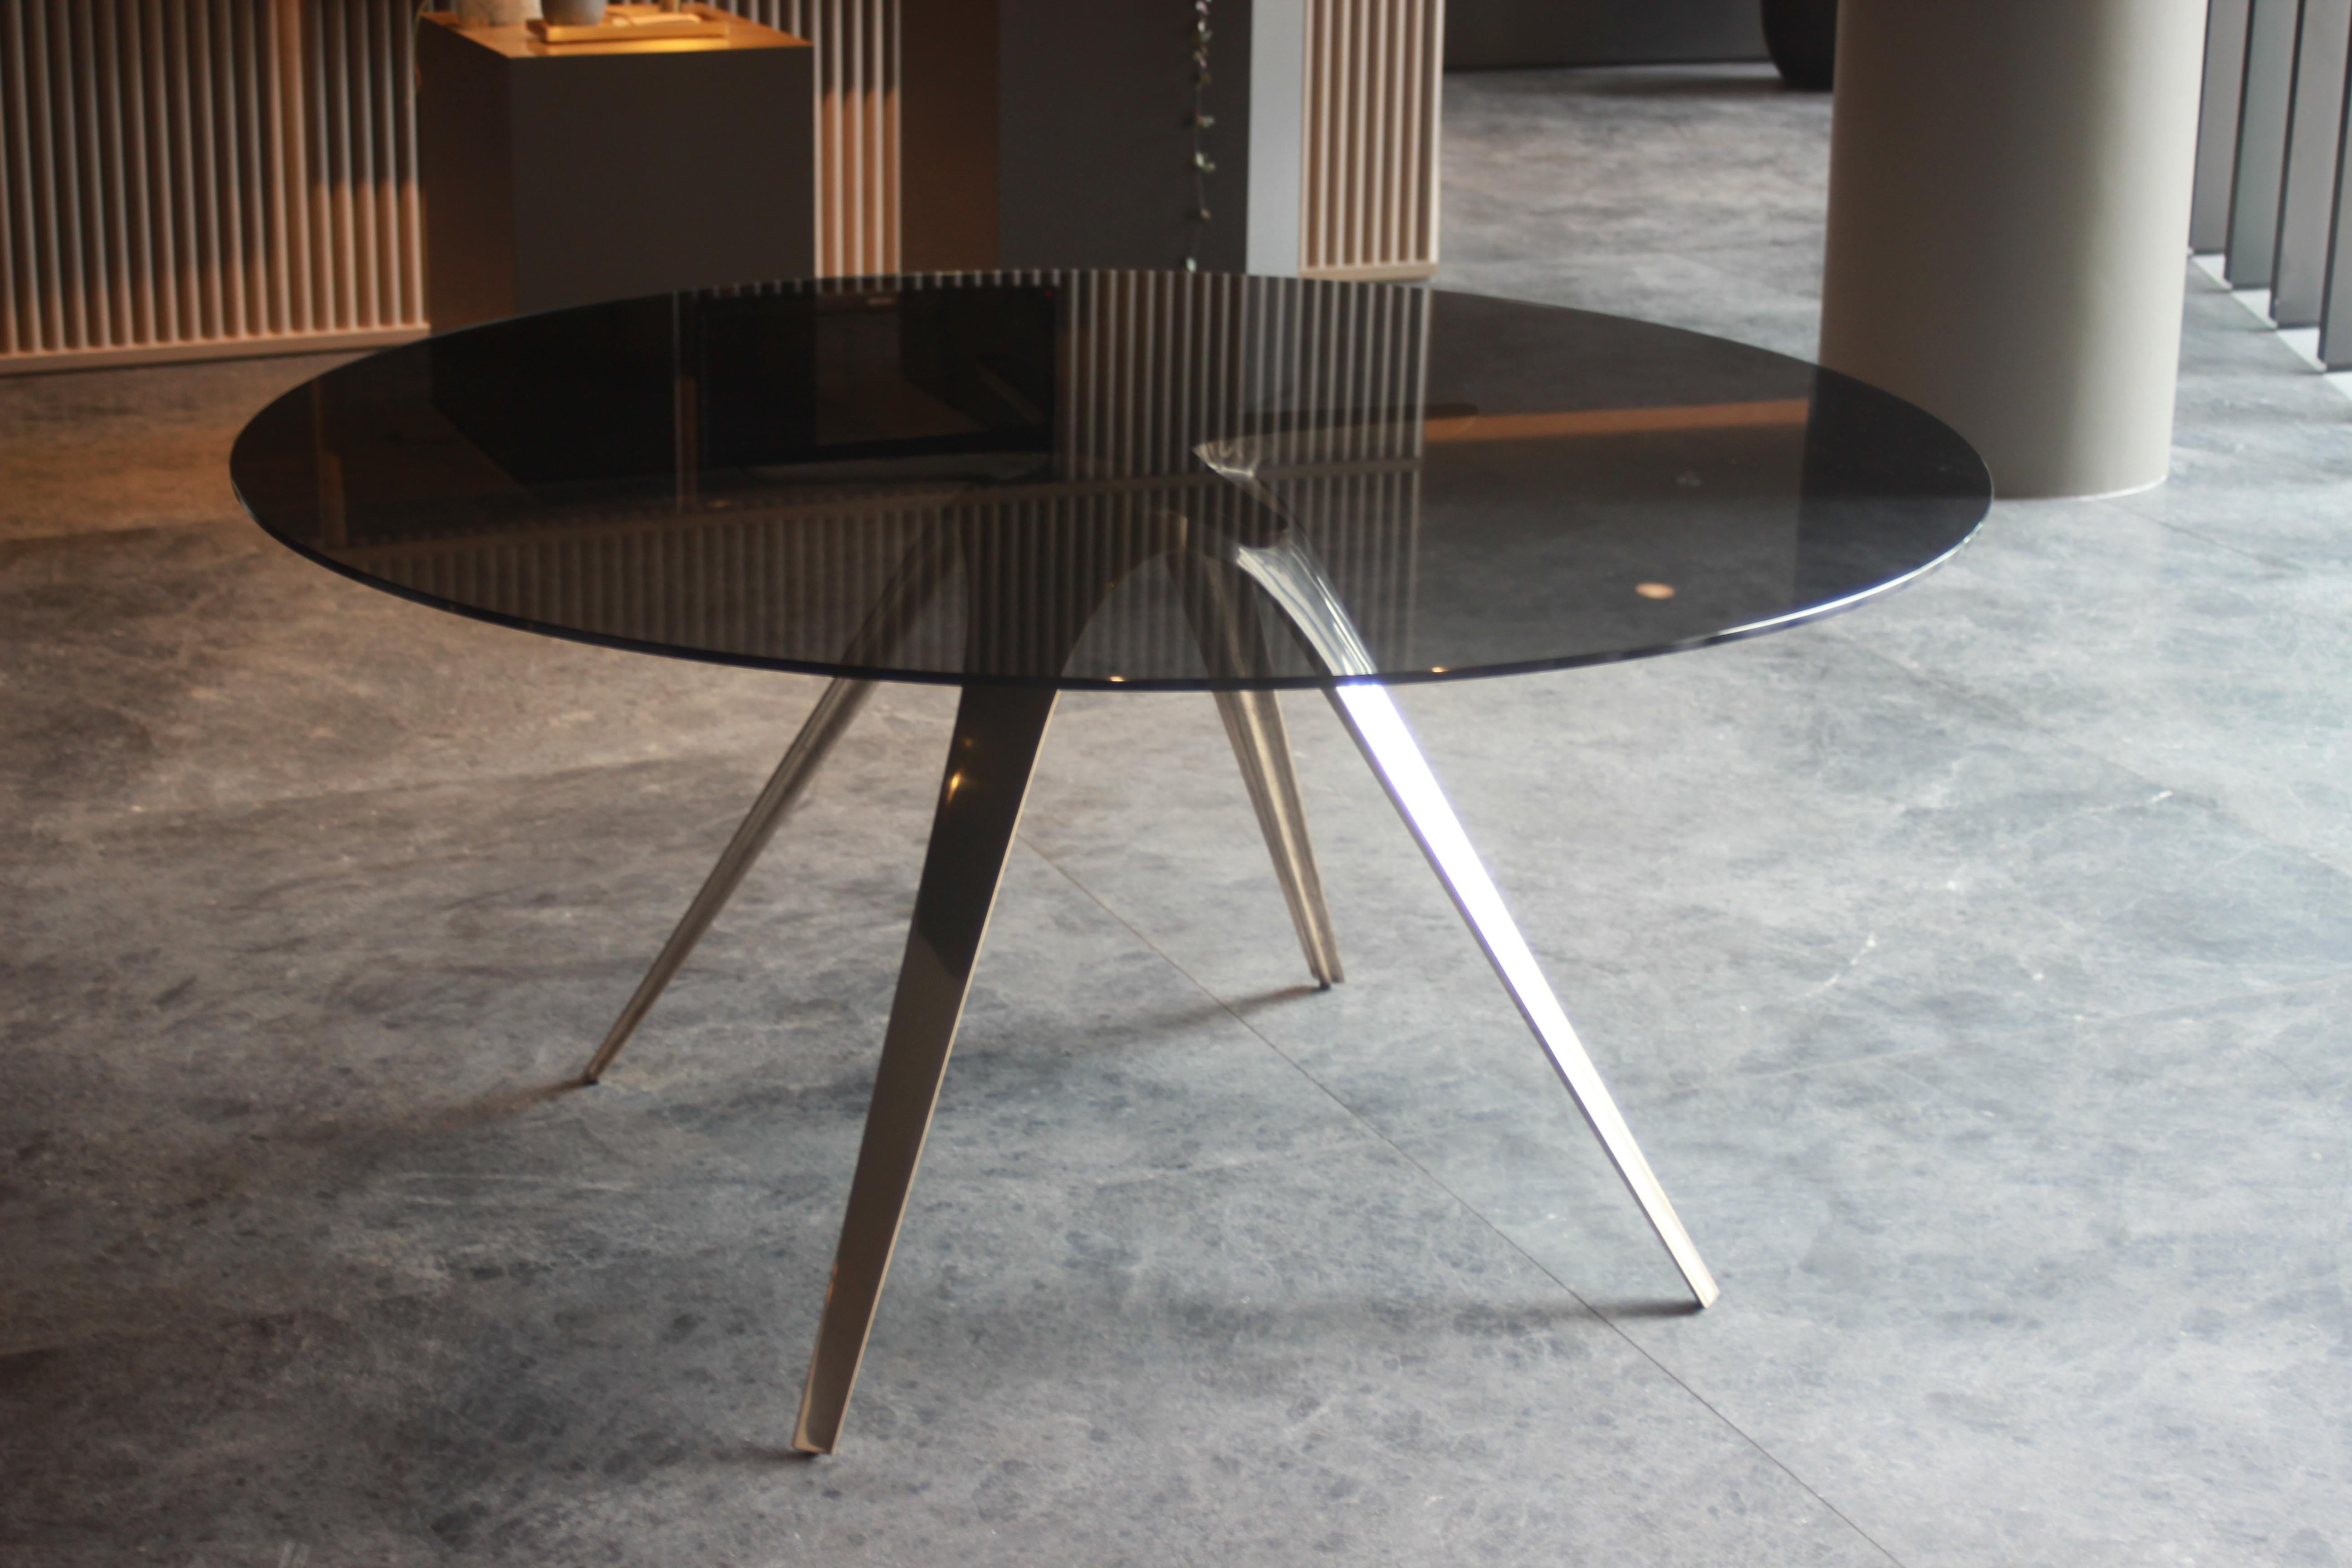 Designed by Daniel Barbera the Spargere table inspired by organism evolution, and how nature uses minimum form yet can create super strong structures. The four legged sandcast solid bronze organic form is hand finished to a smooth mirror polish,